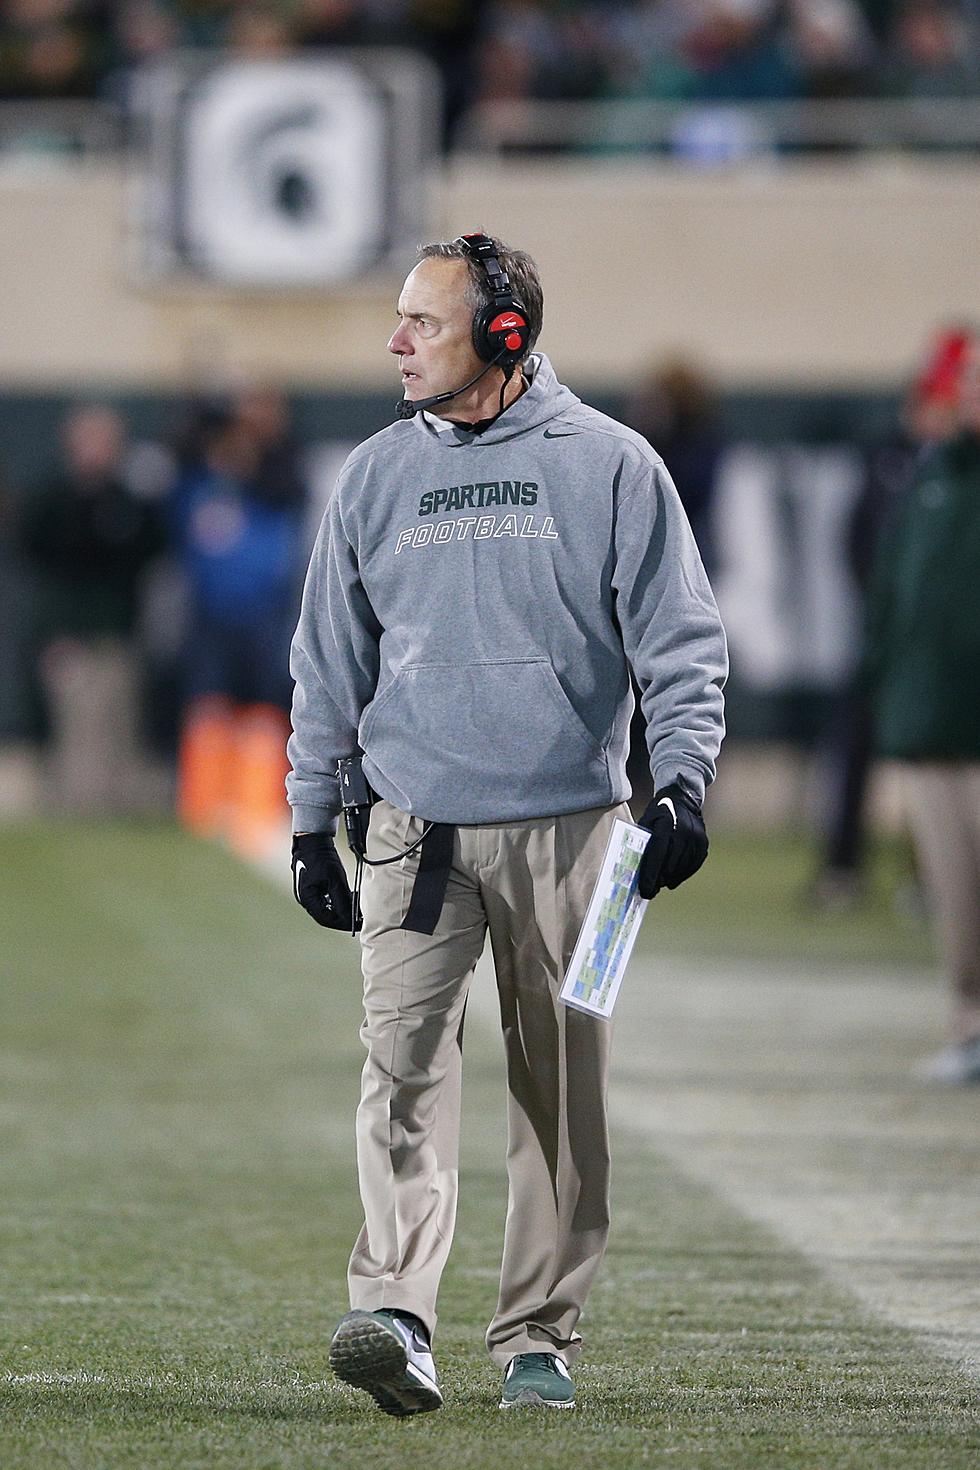 Tim Staudt Commentary: Where Does MSU Go From Here?